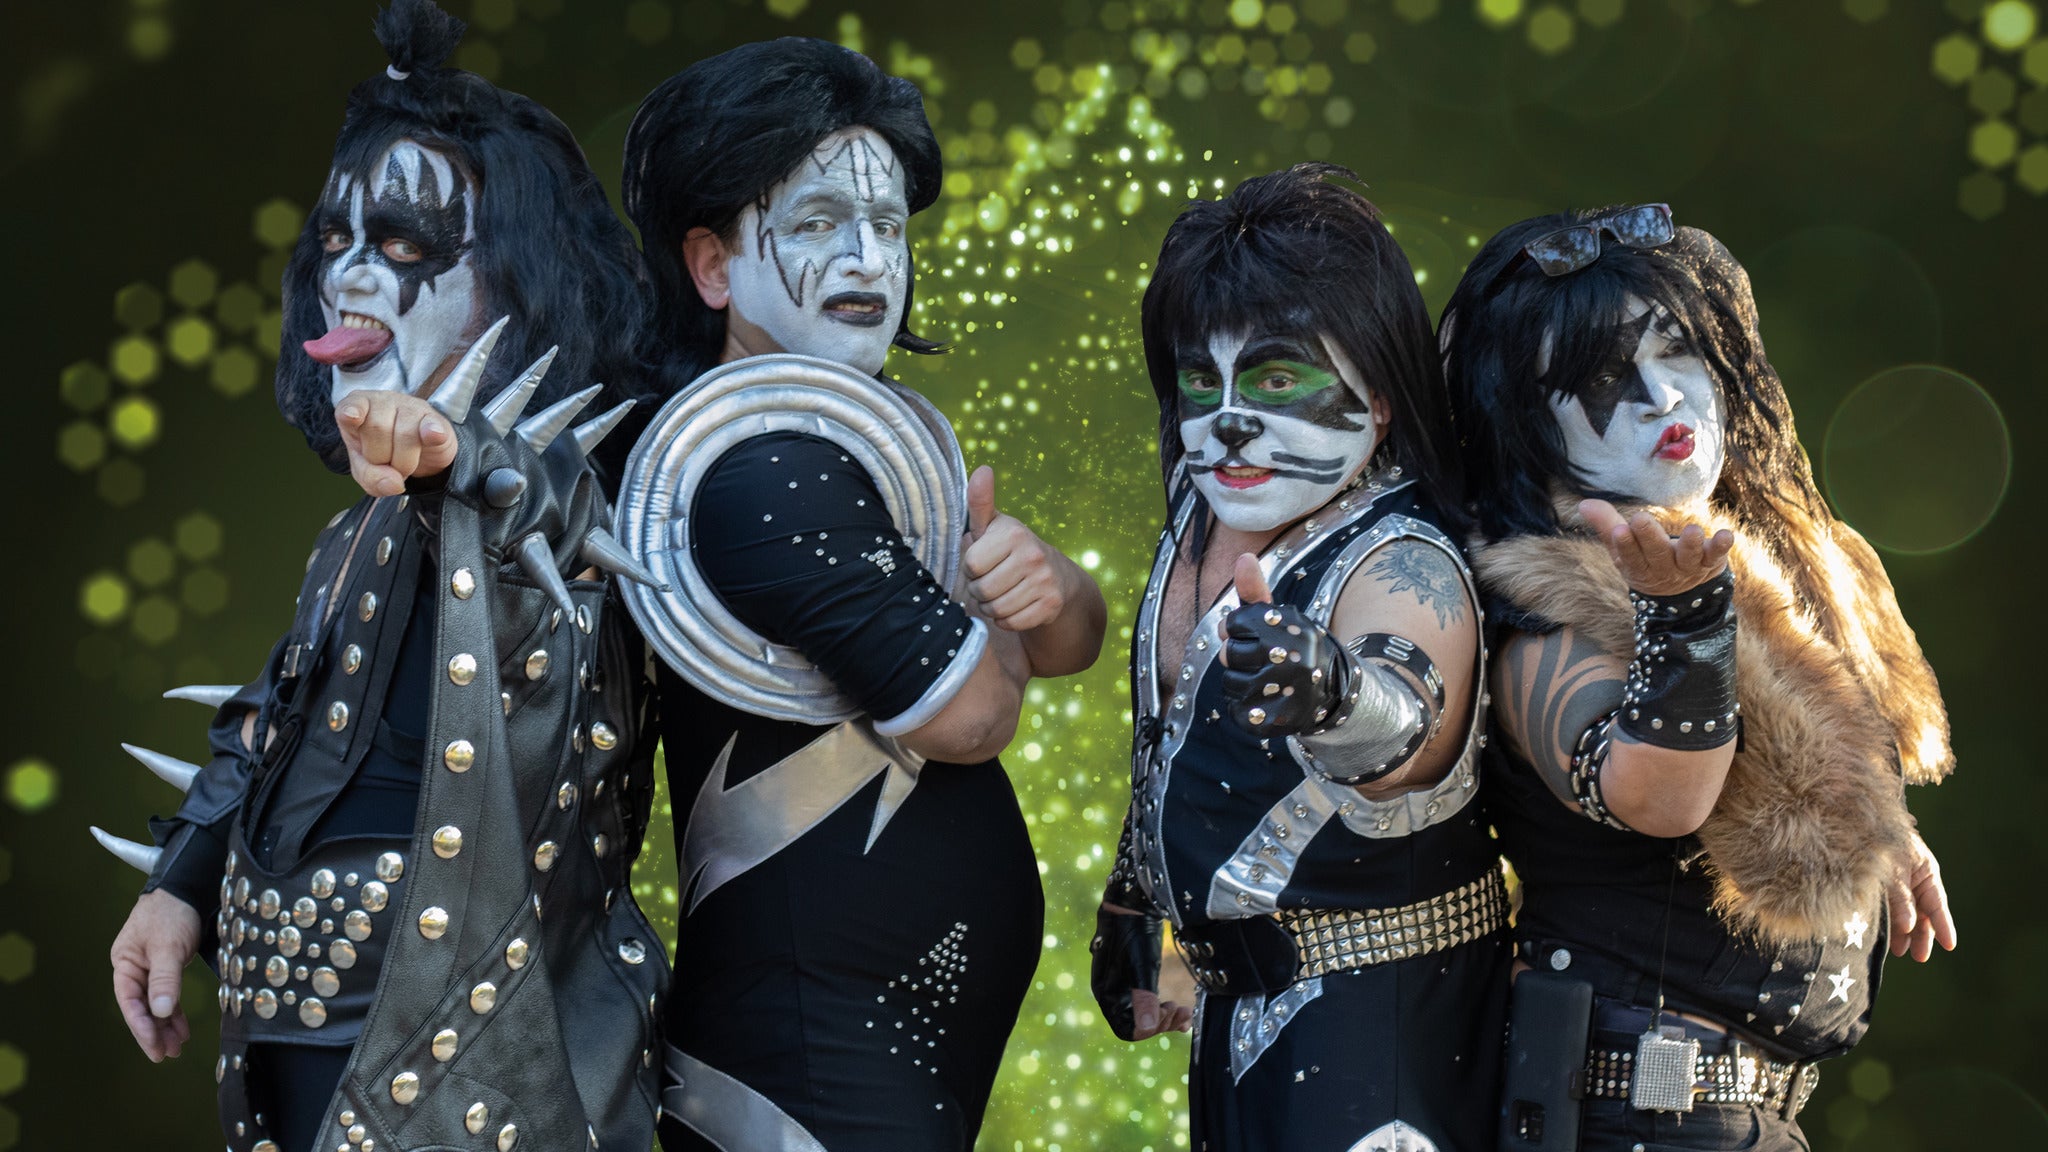 Mini Kiss in Stateline promo photo for Beat the Line Official Platinum presale offer code